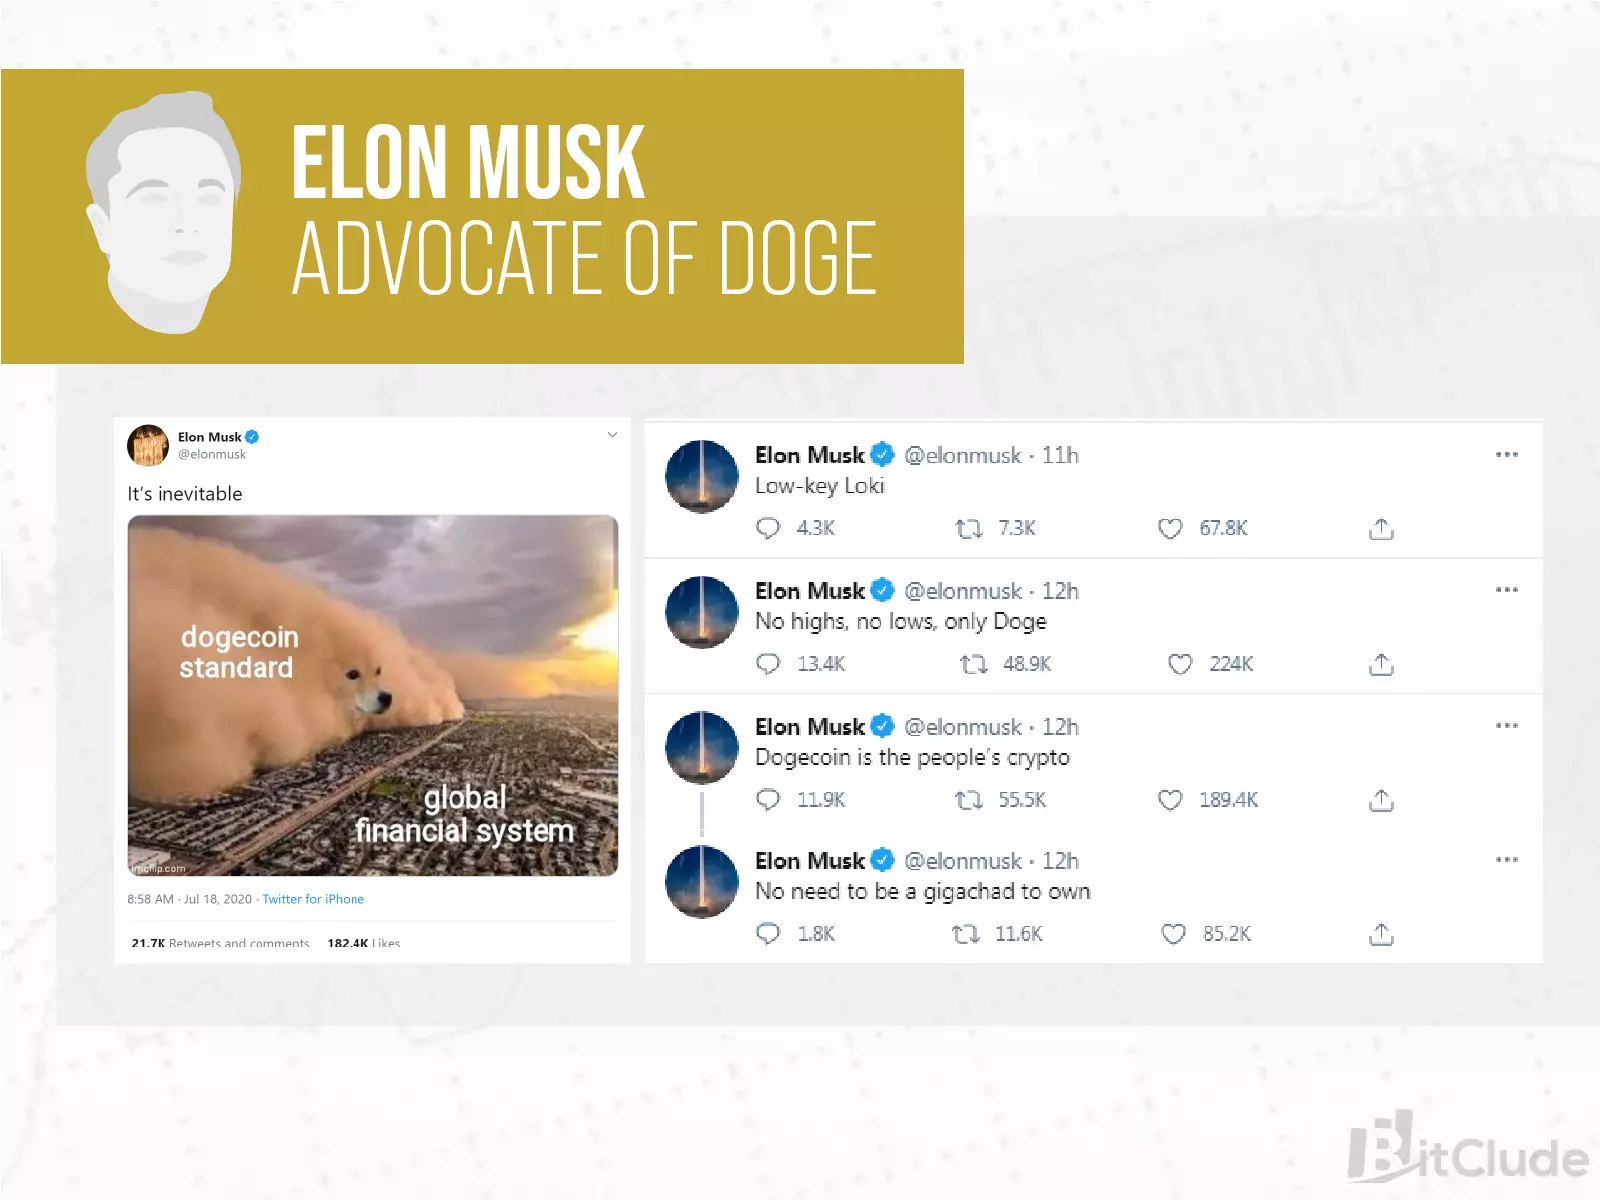 One of the greatest Dogecoin promotors is Elon Musk, who promoted the cryptocurrency through his Twitter account.